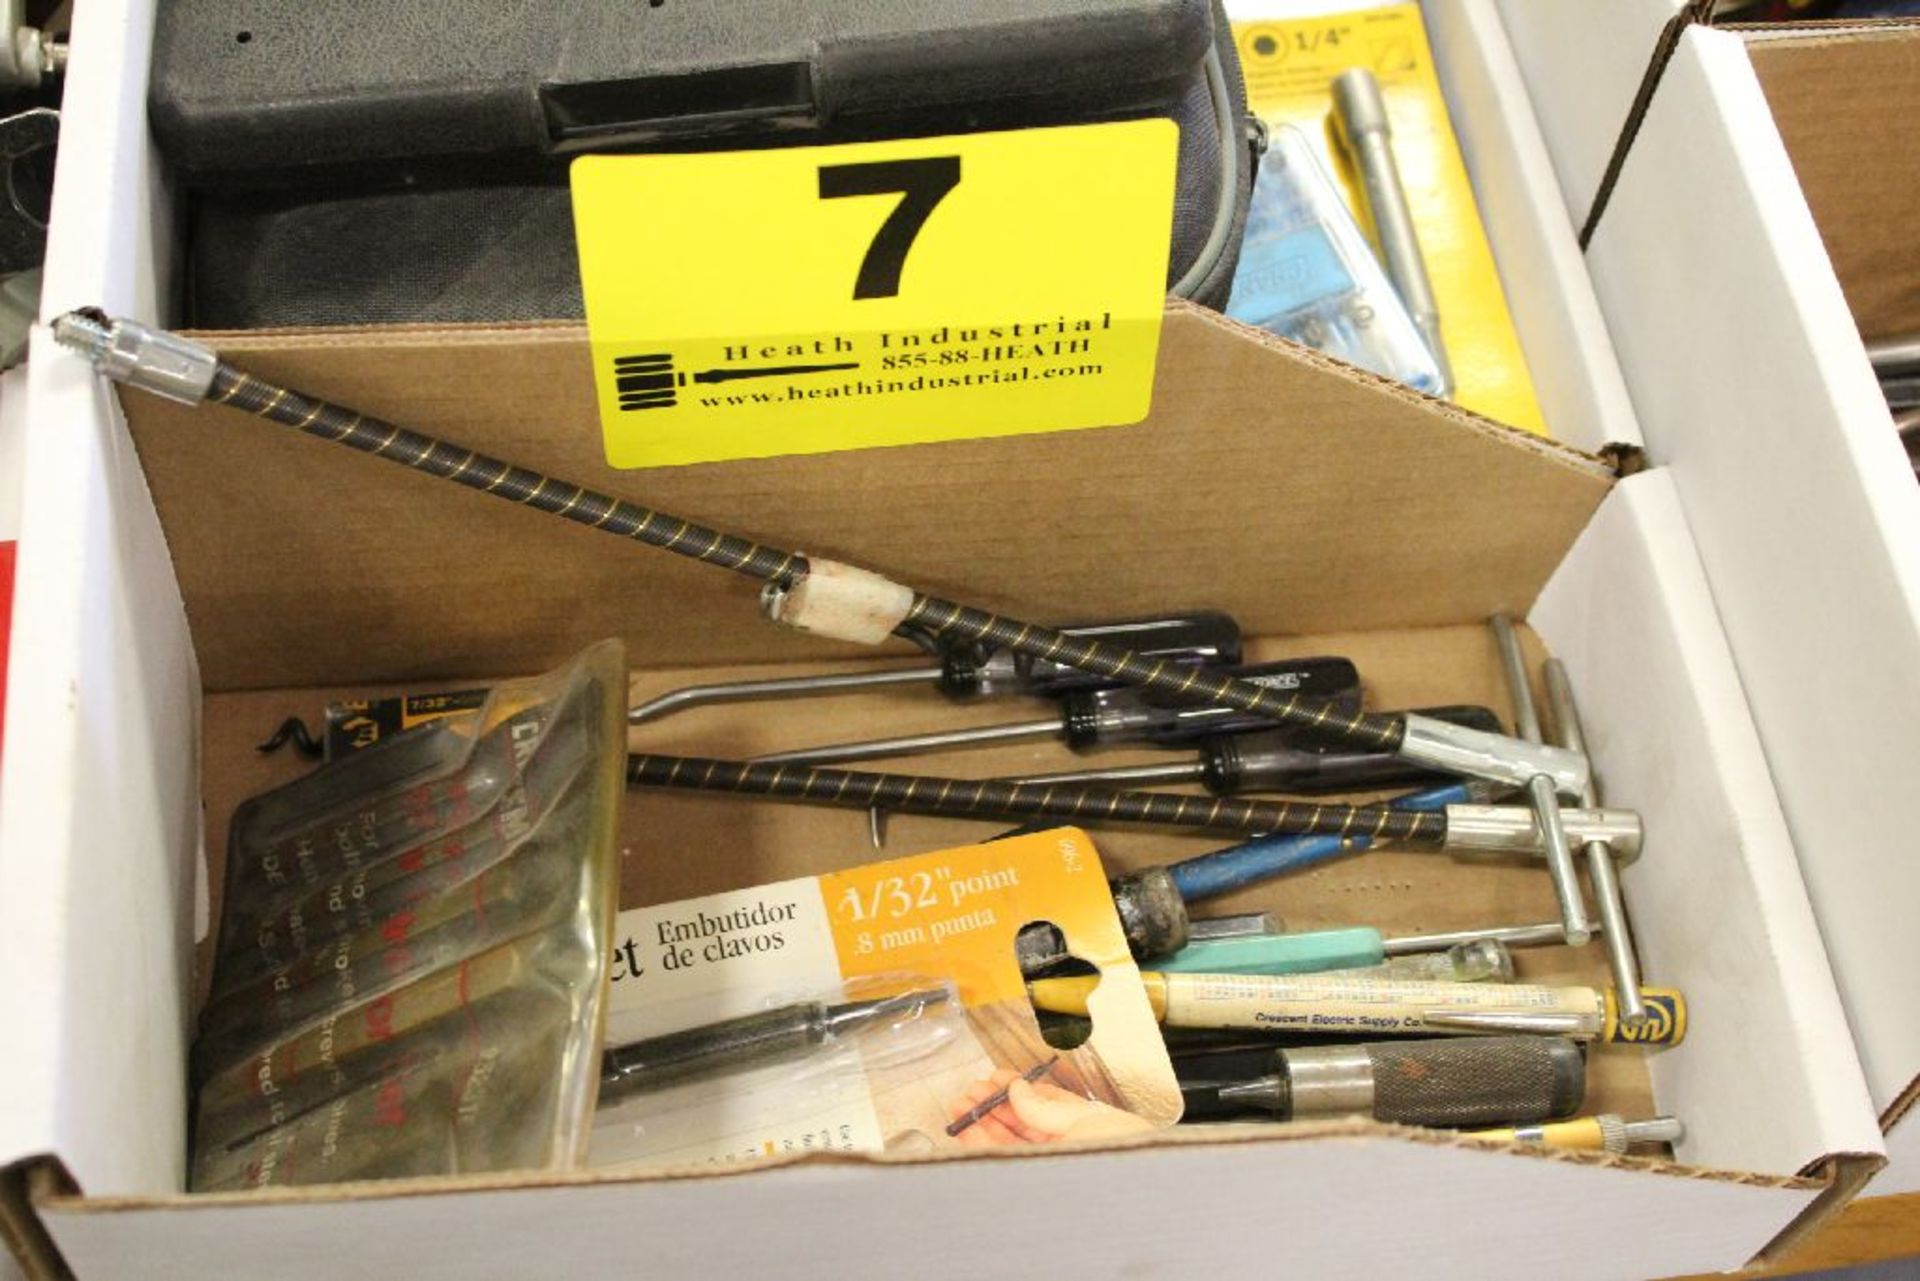 ASSORTED NAIL SETS, SCREW EXTRACTORS, AND HAND CRANK SCREWDRIVERS IN BOX